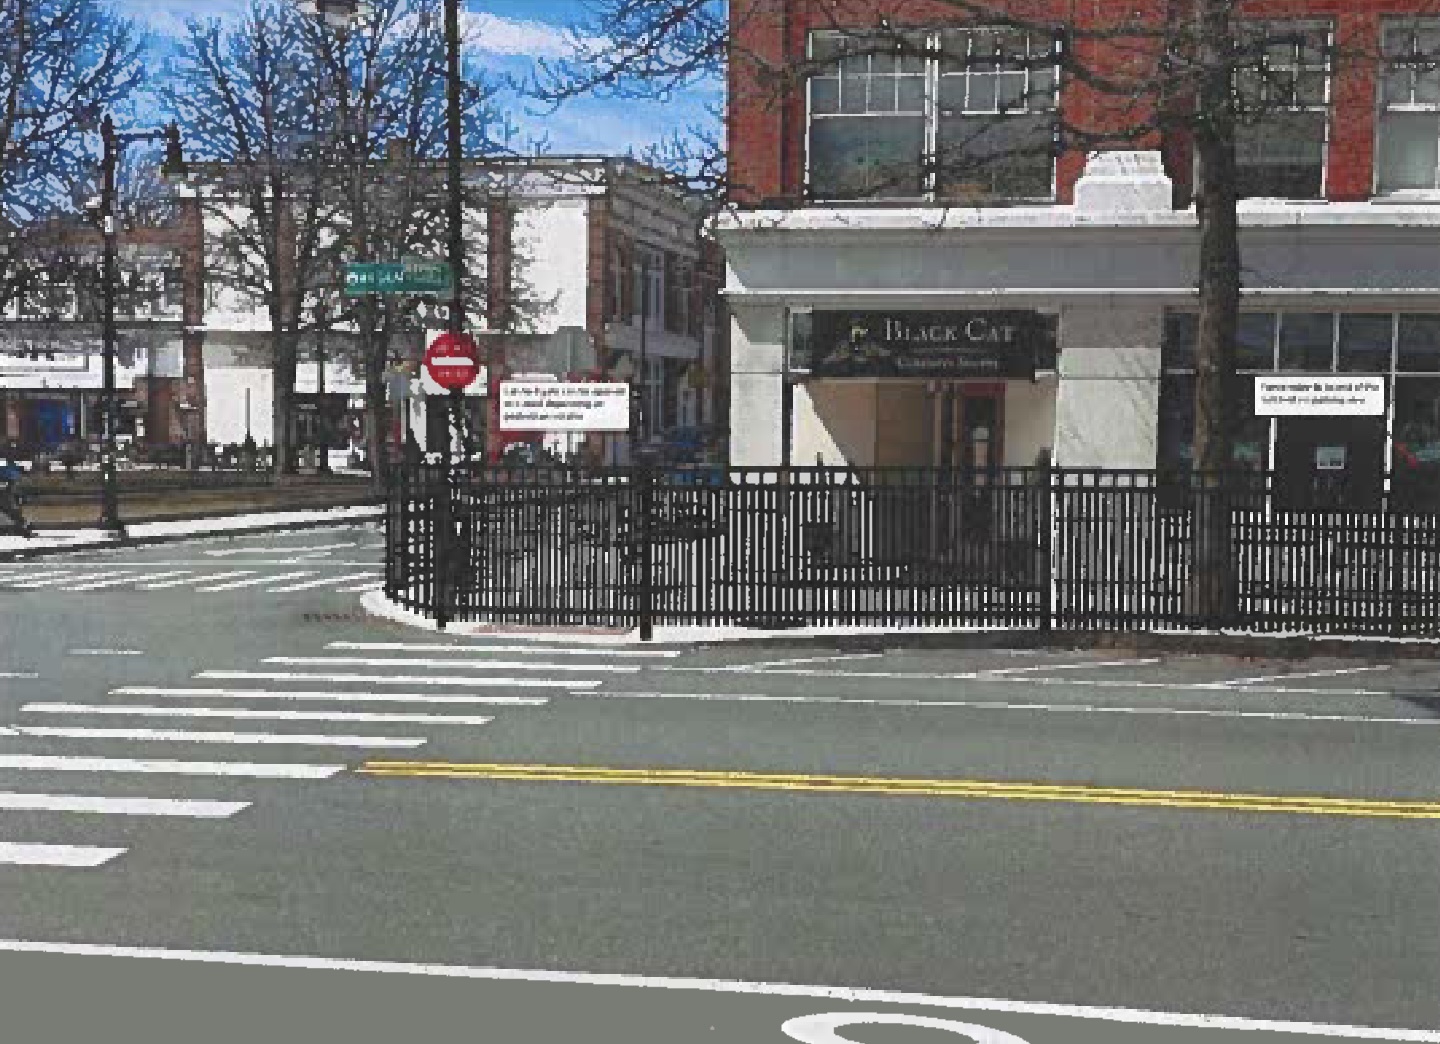 A rendering of a city street with a black metal fence surrounding the sidewalk on the far side of the street. In the background is a brick multi-story building